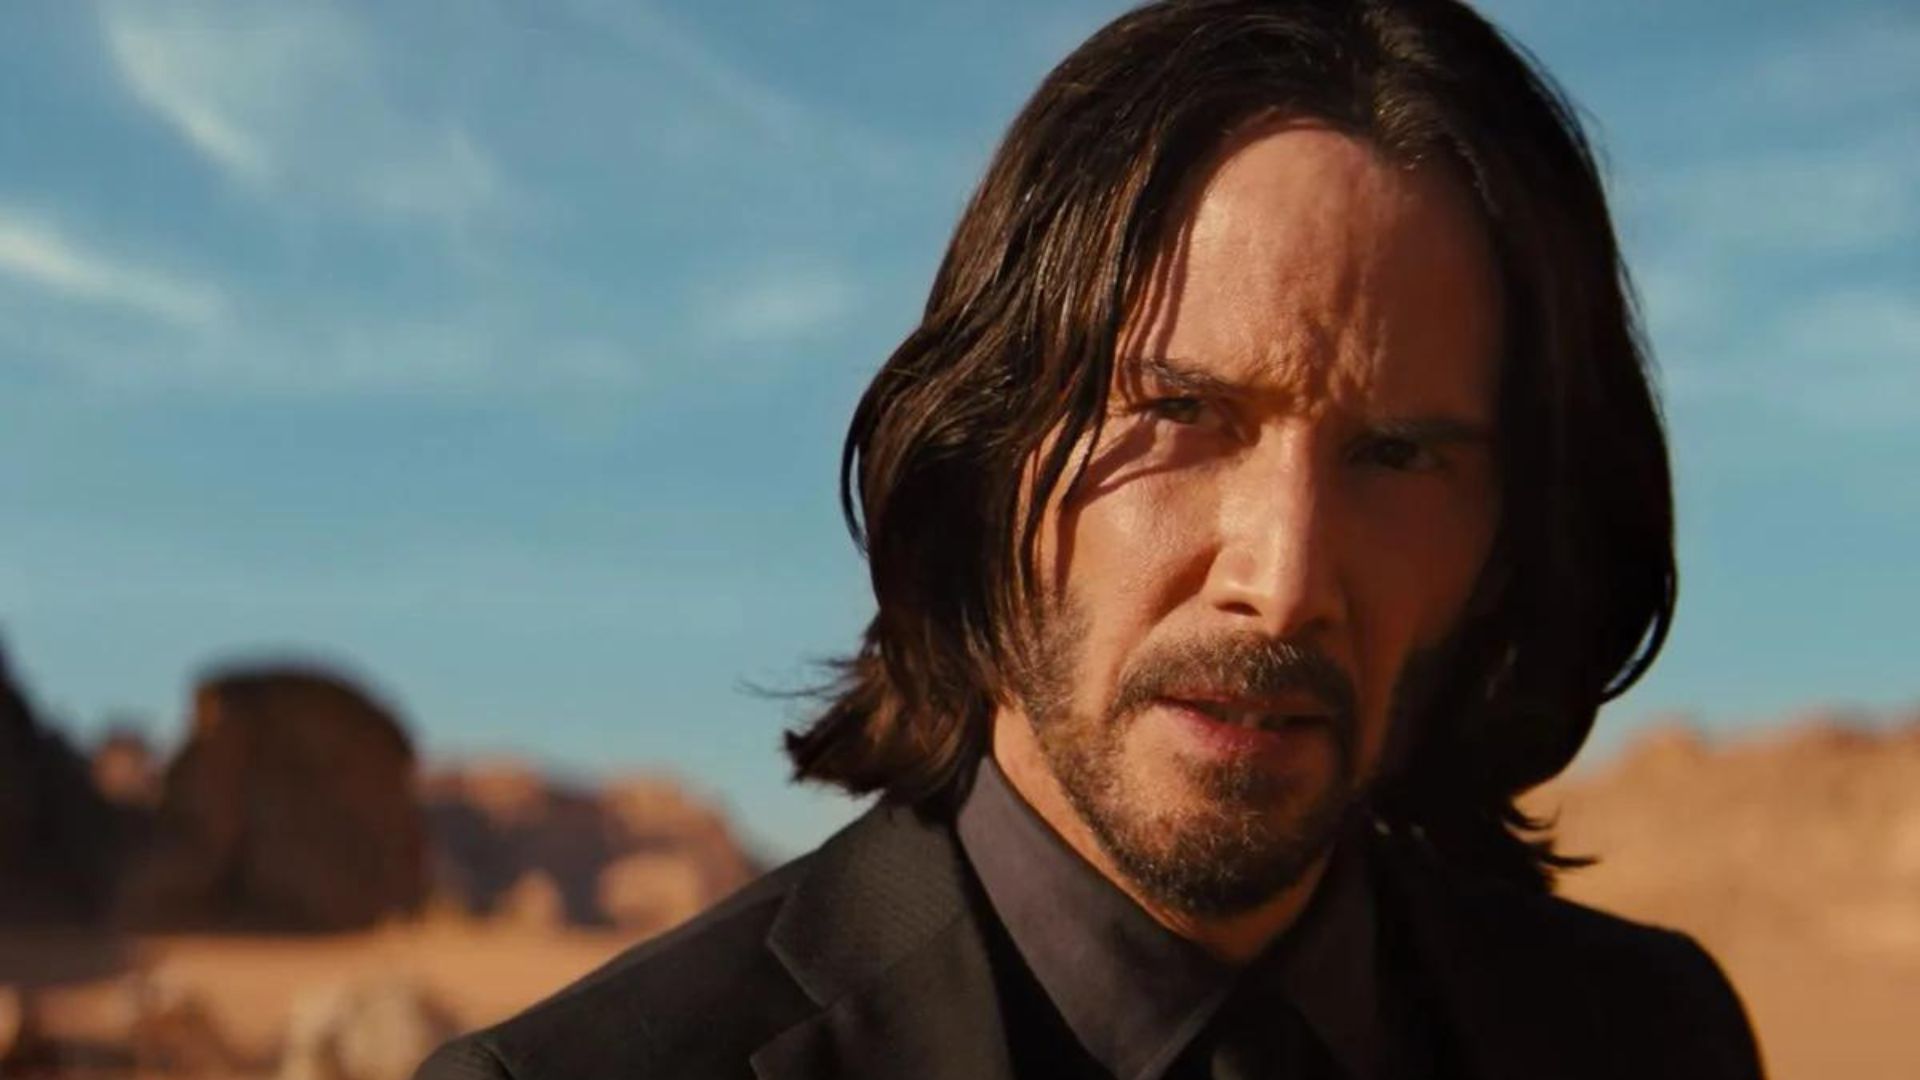 Keanu Reeves' Exhaustion Playing John Wick Almost Led to His Character's Demise